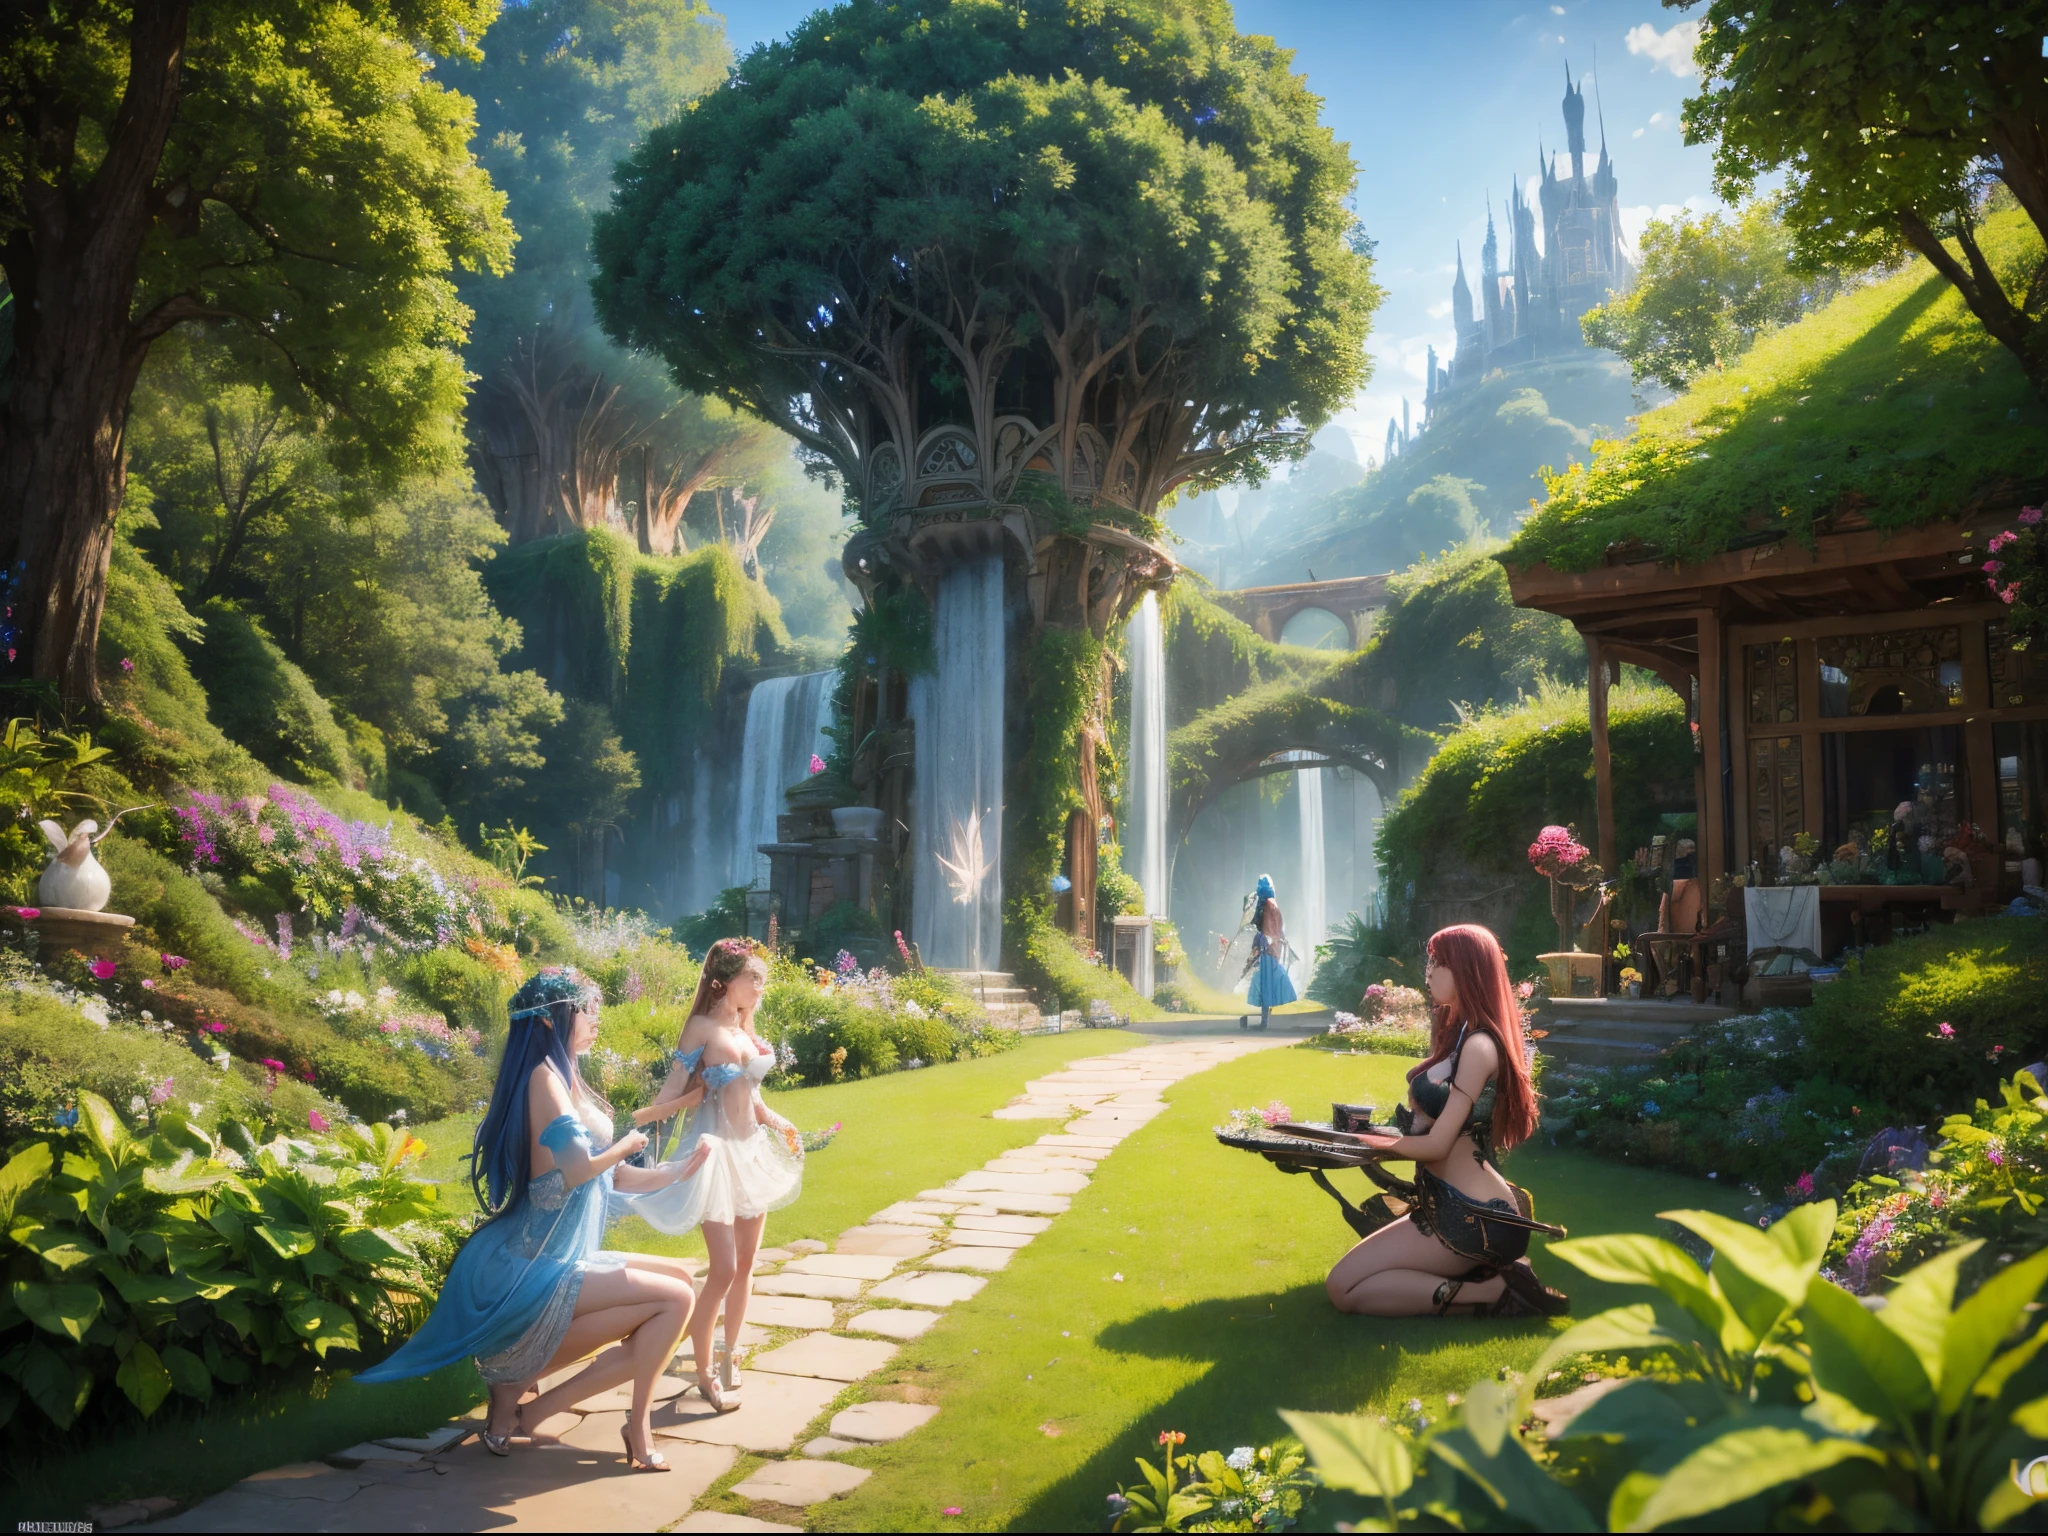 Illustrate a whimsical Eden where AI-powered creatures and enchanted organic beings engage in harmonious activities, blurring the lines between magic and technology. enormous 